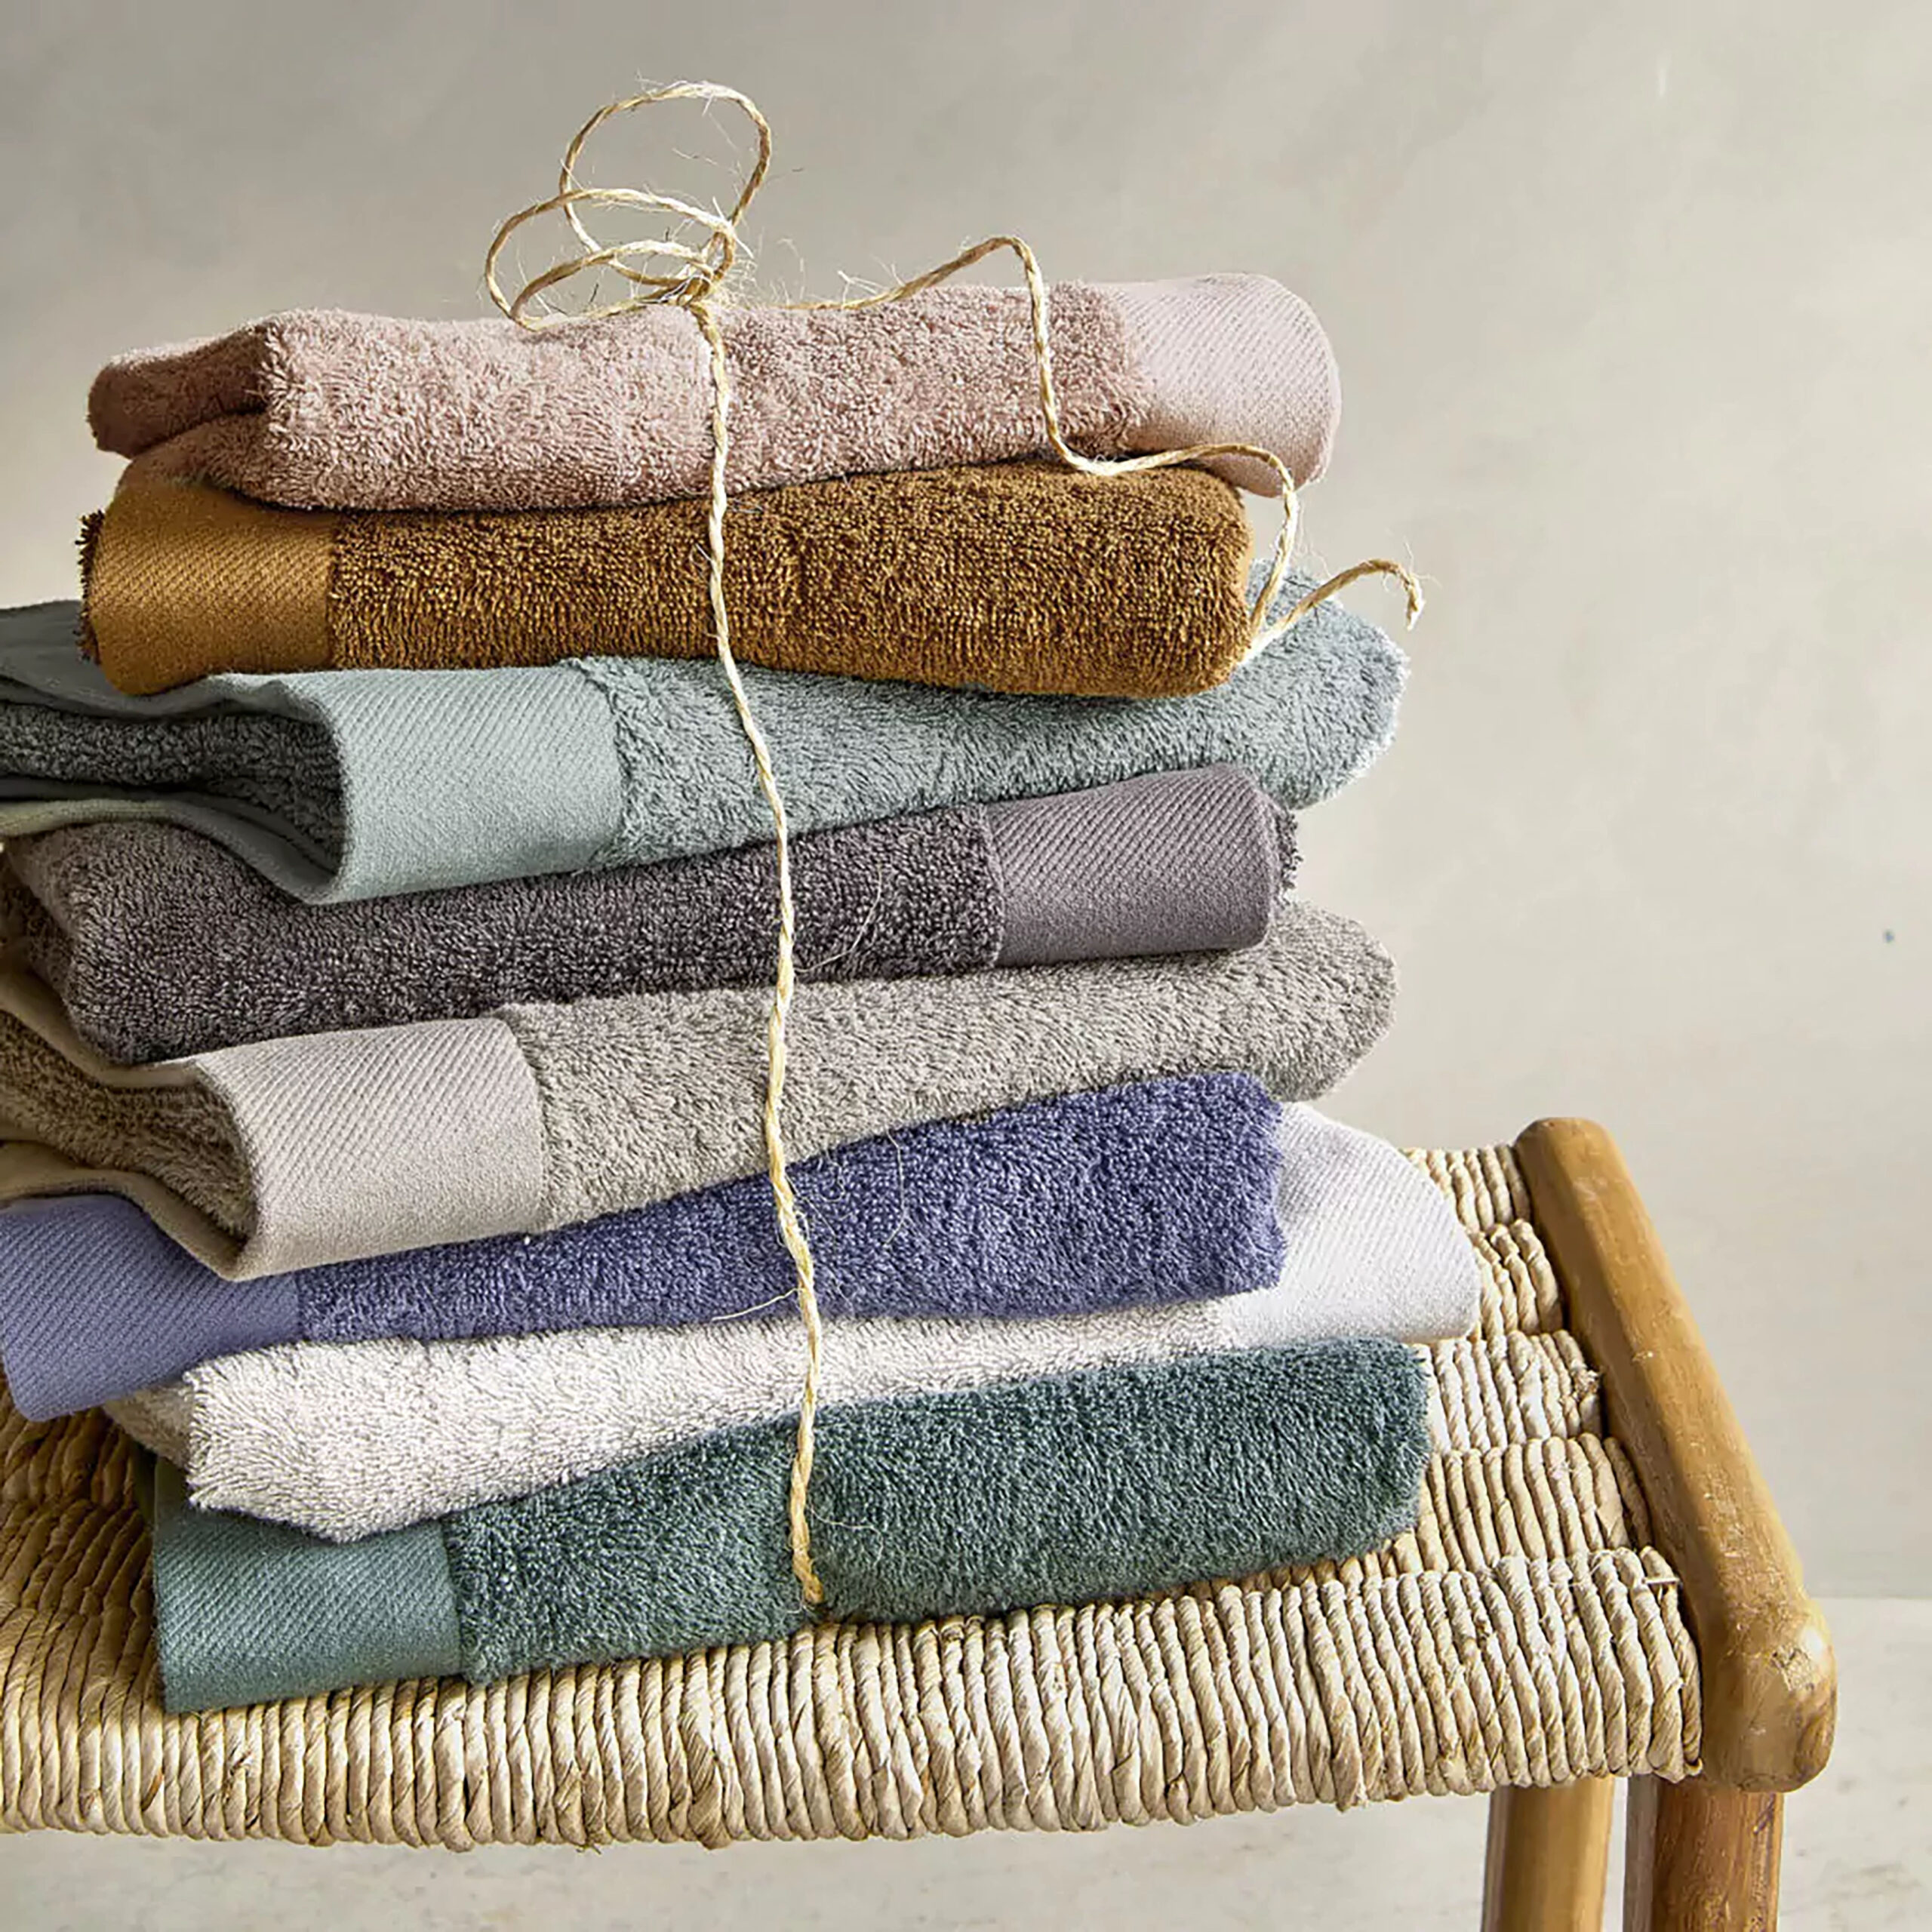 Stack of towels made from recycled cotton sits atop wood bench; stack is bound with twine.